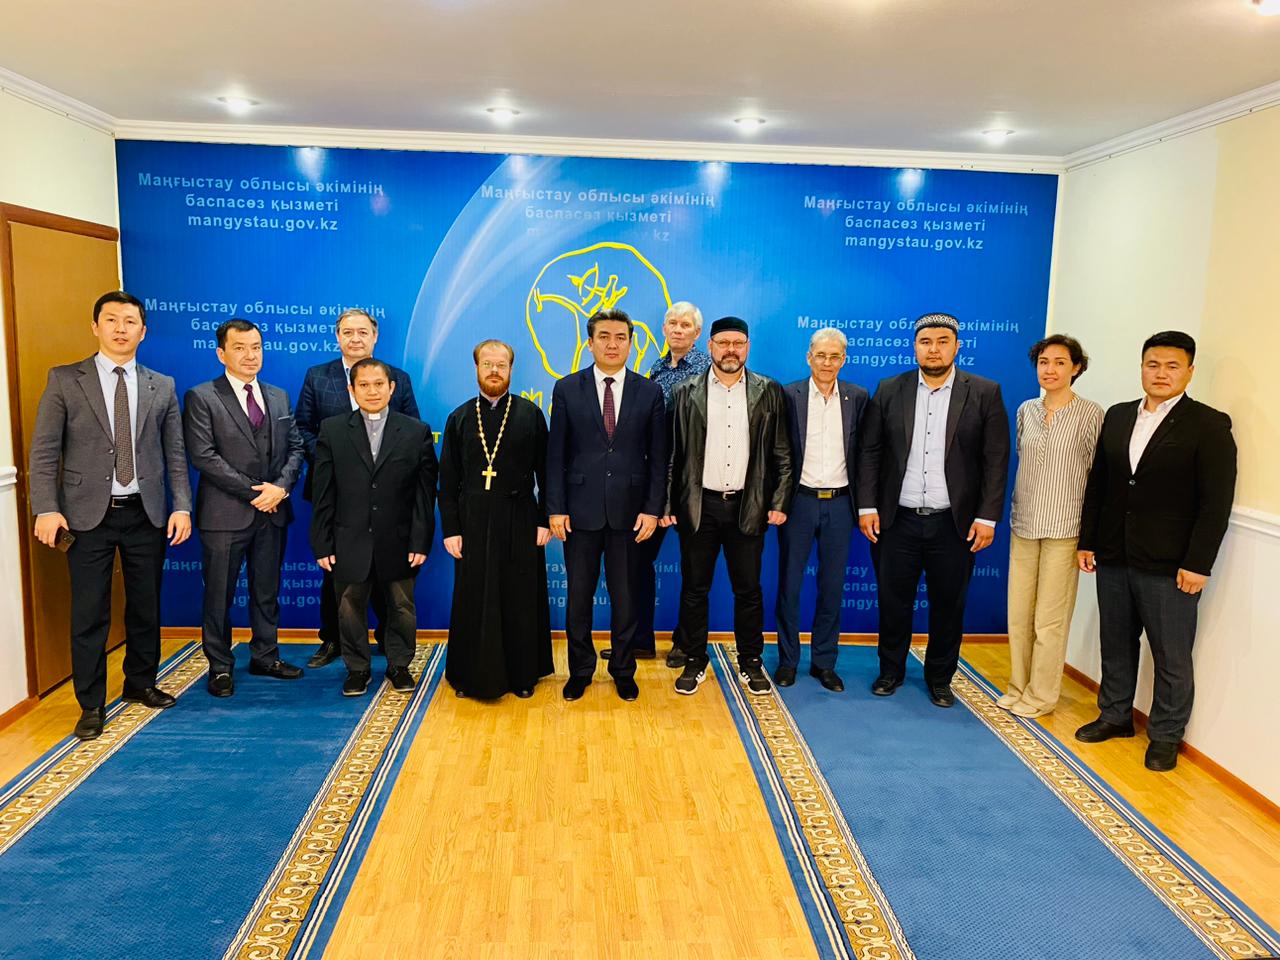 A meeting of the club of heads of religious associations was held